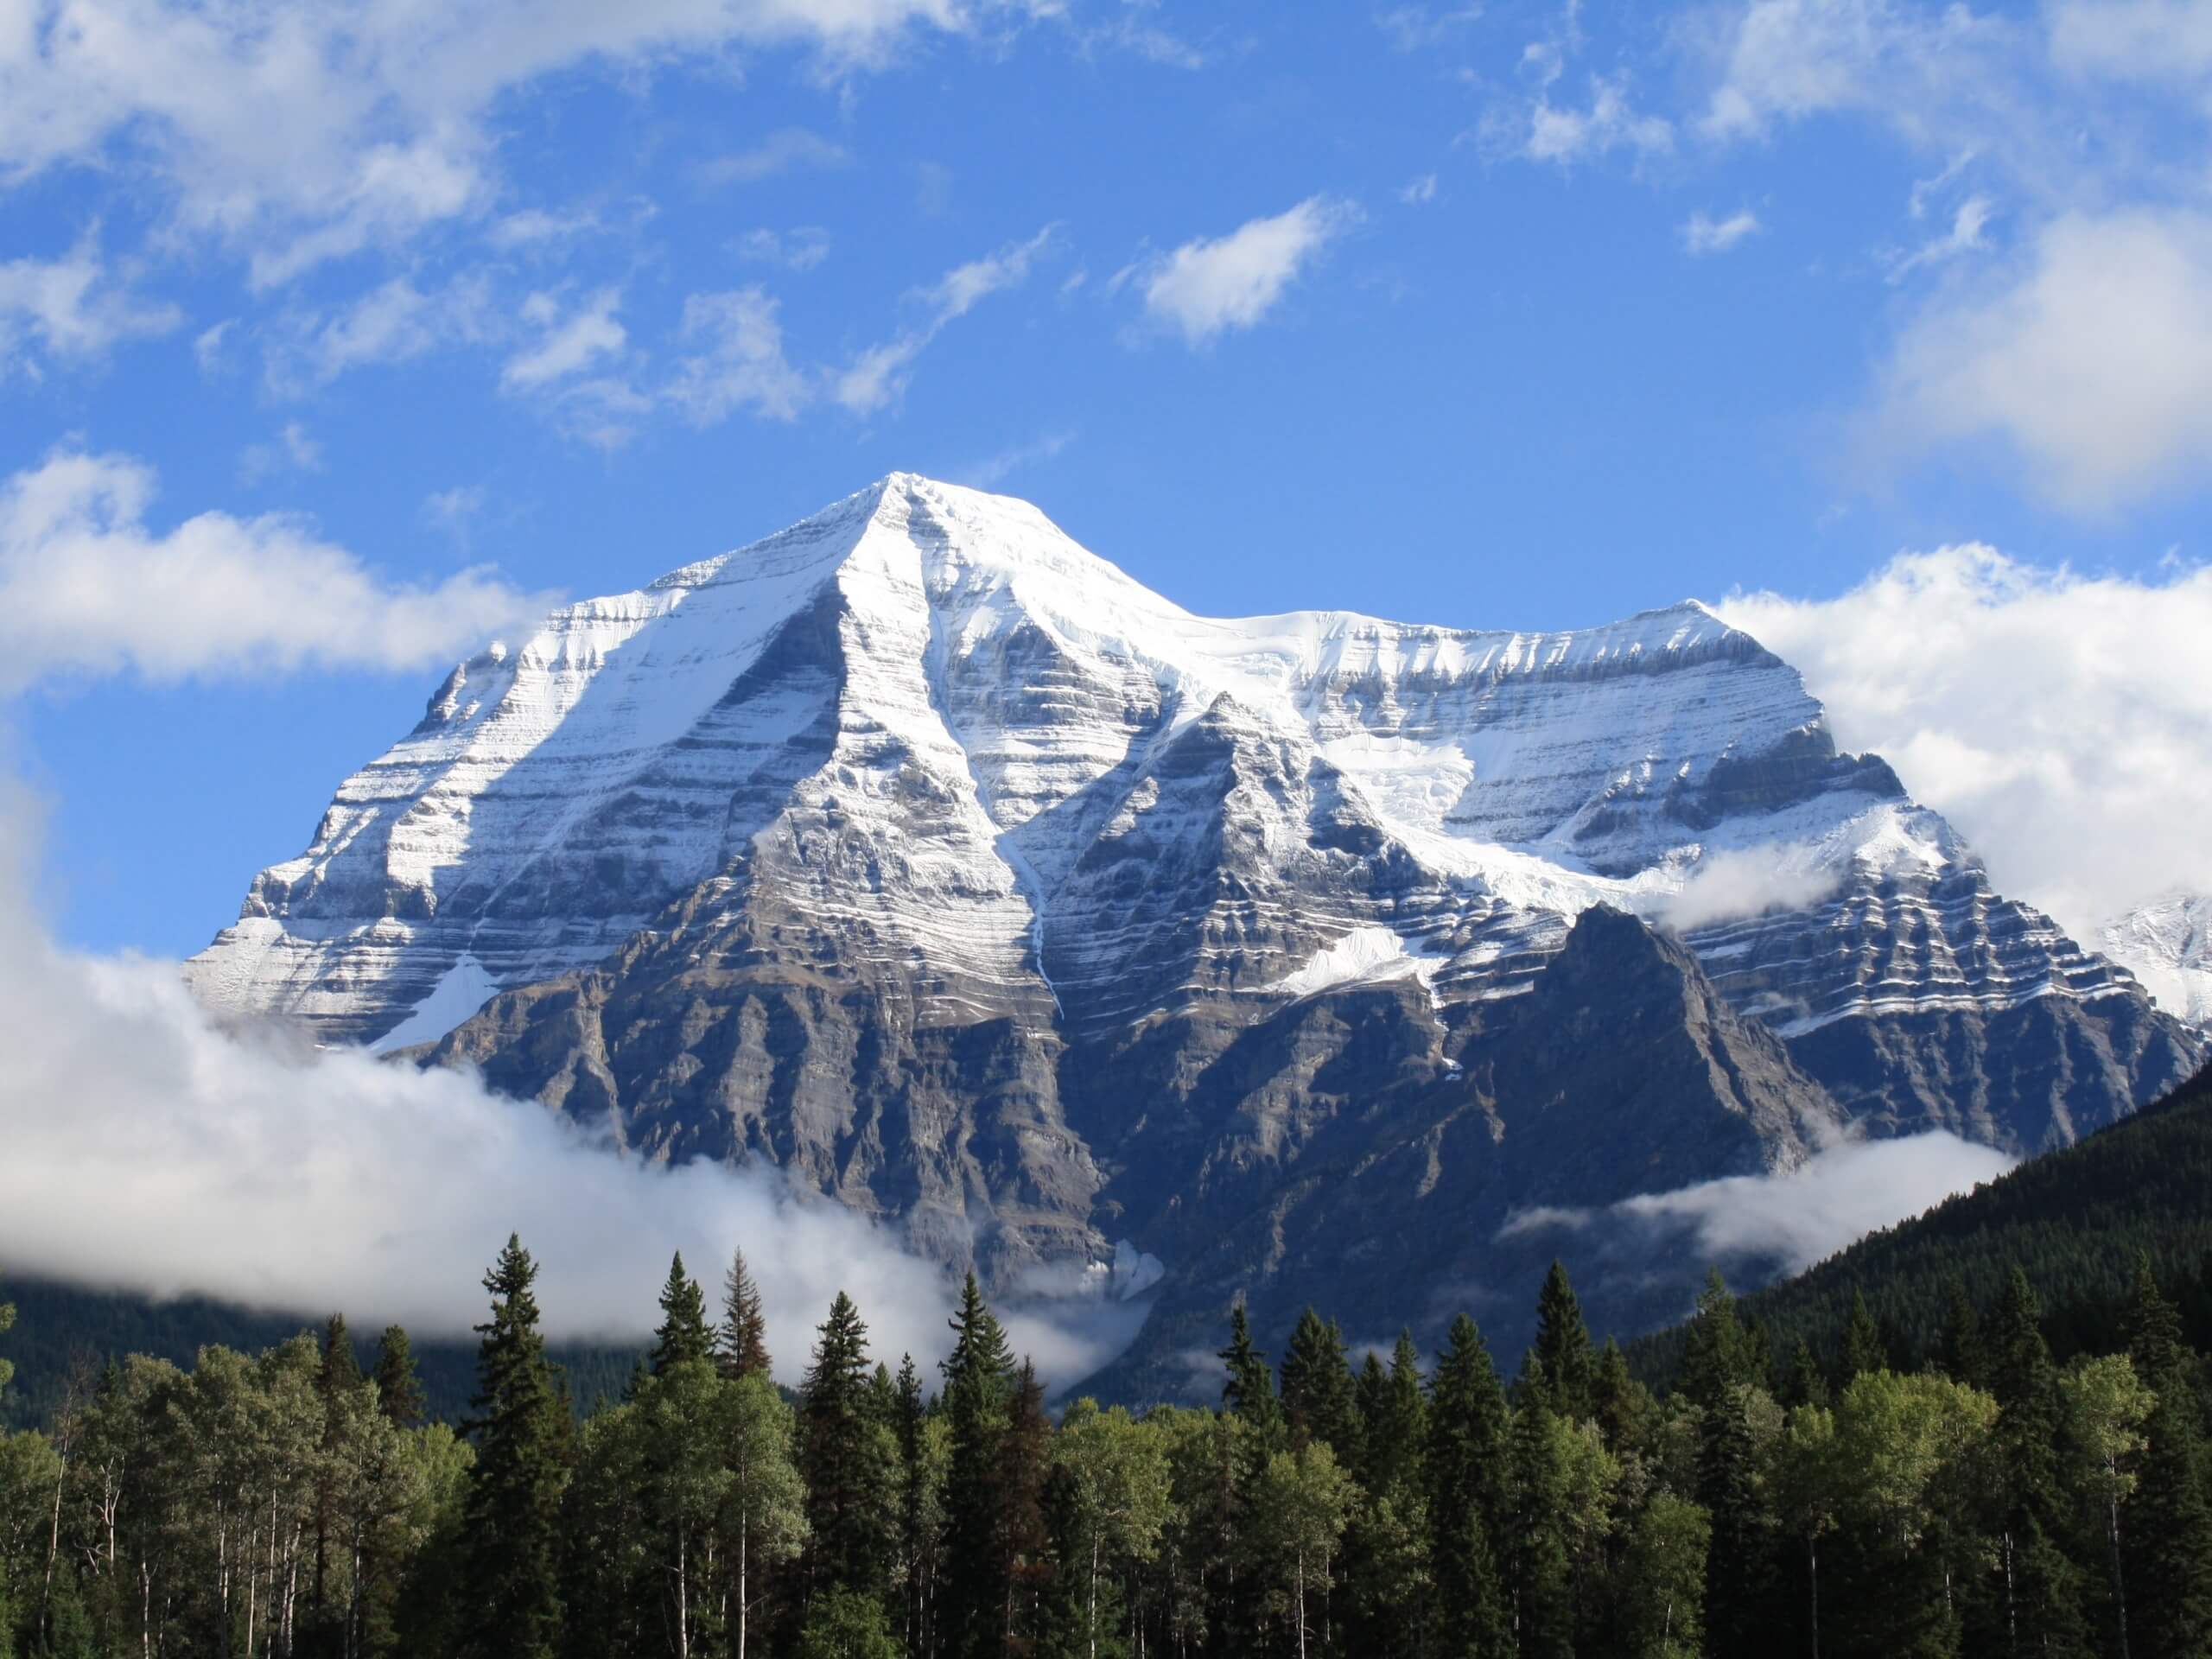 Mount Robson from afar